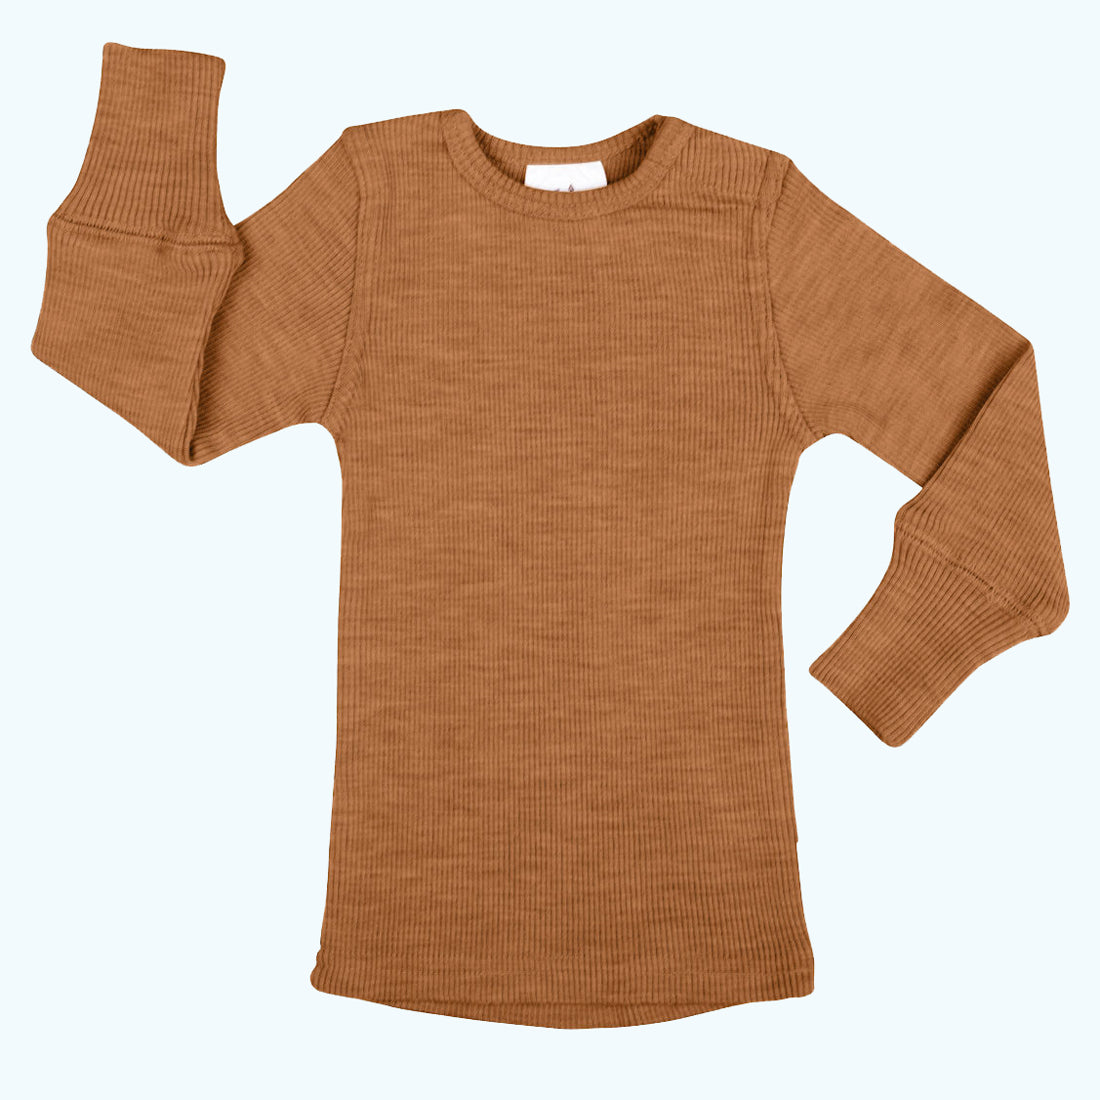 Organic Cotton size 3T Boy's Thermal Sleeved Long Sleeve Shirt 